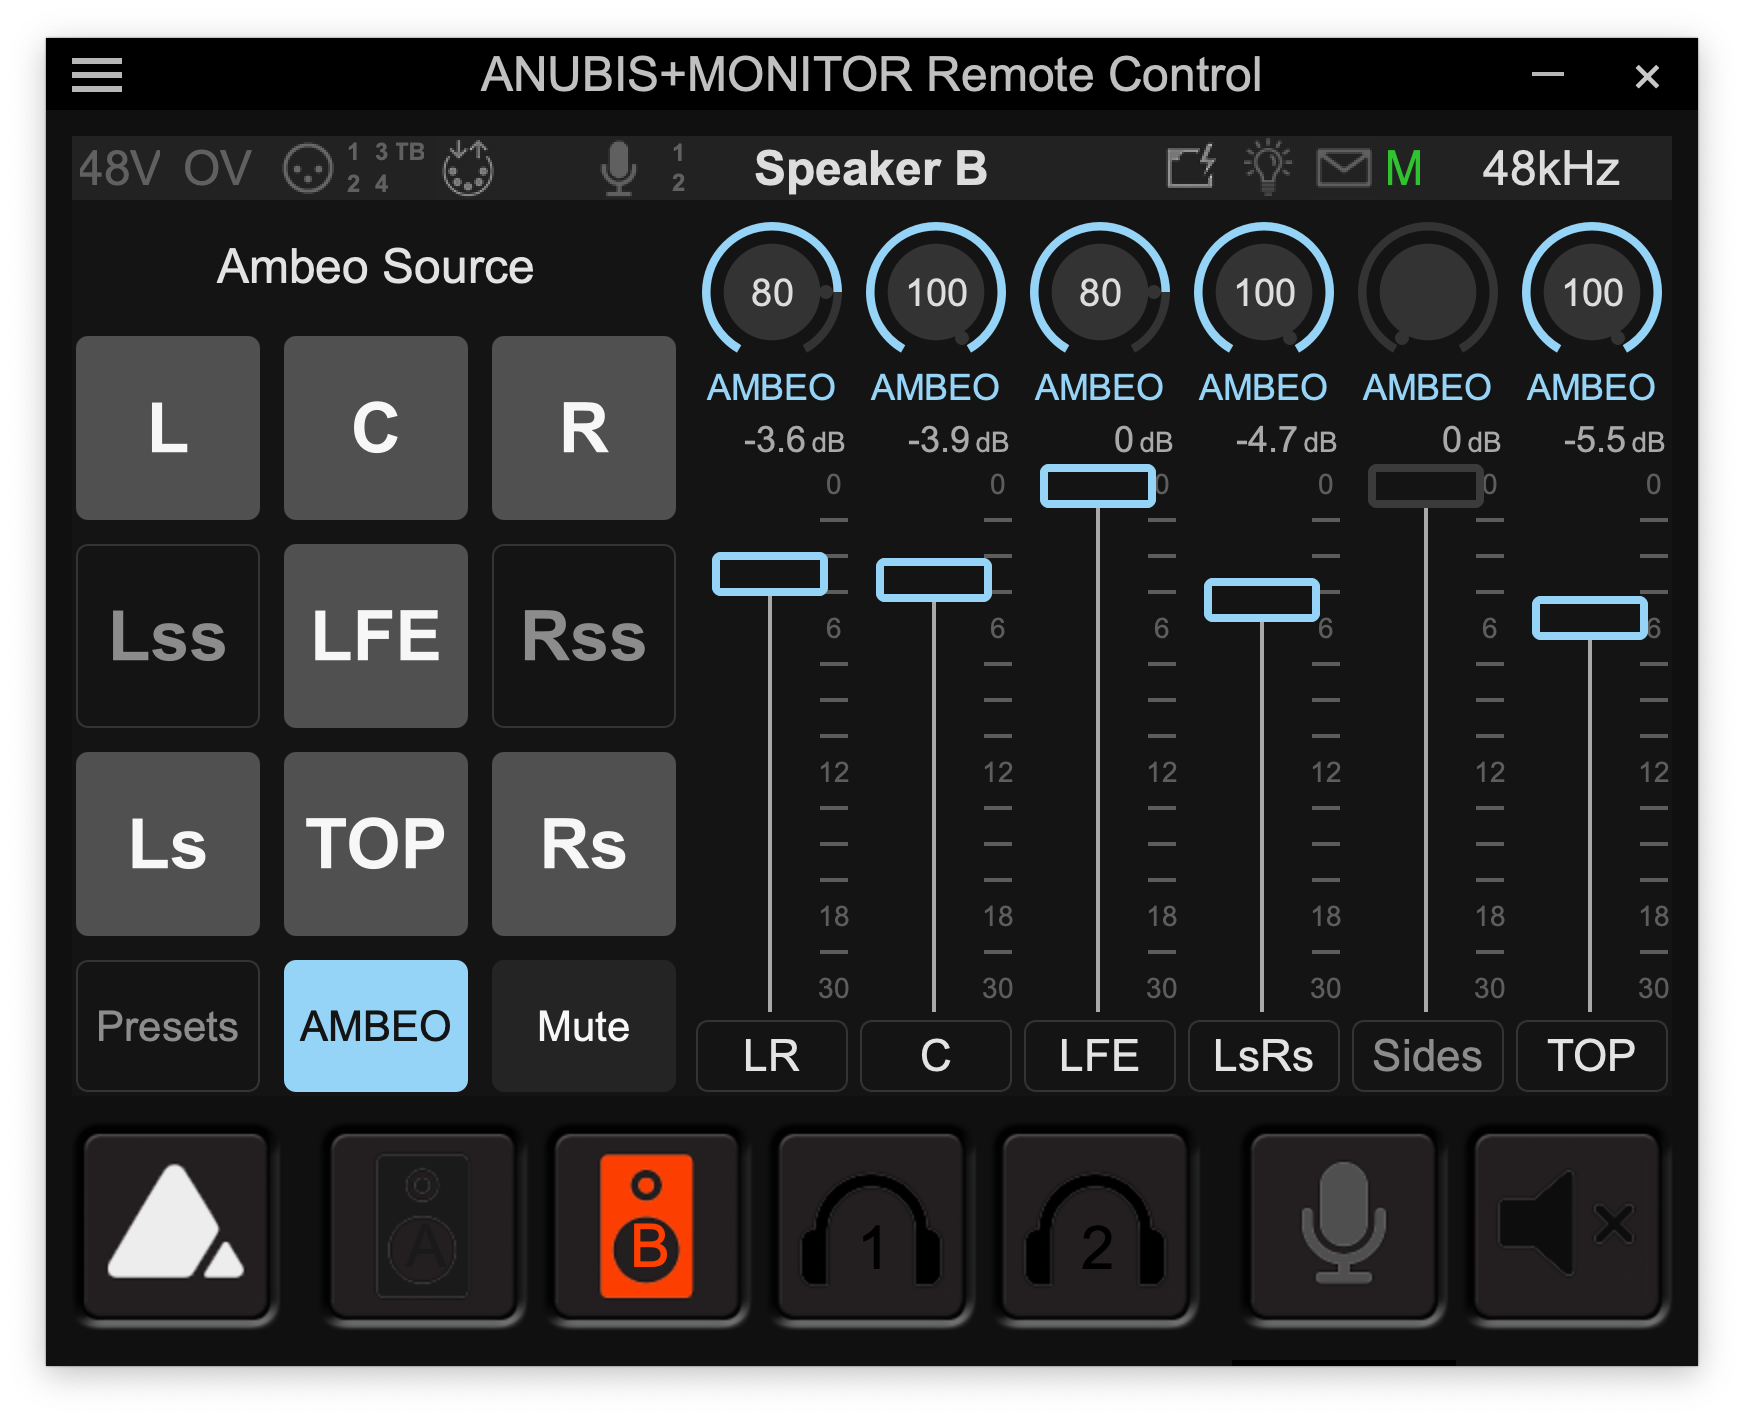 The AMBEO 2-Channel Spatial Audio live renderer unlocks investments into surround and immersive content for all viewers. Pictured is the prototype of the renderer interface for fine-tuning the spatially enhanced two-channel mix, controlled via the standard Anubis remote control software